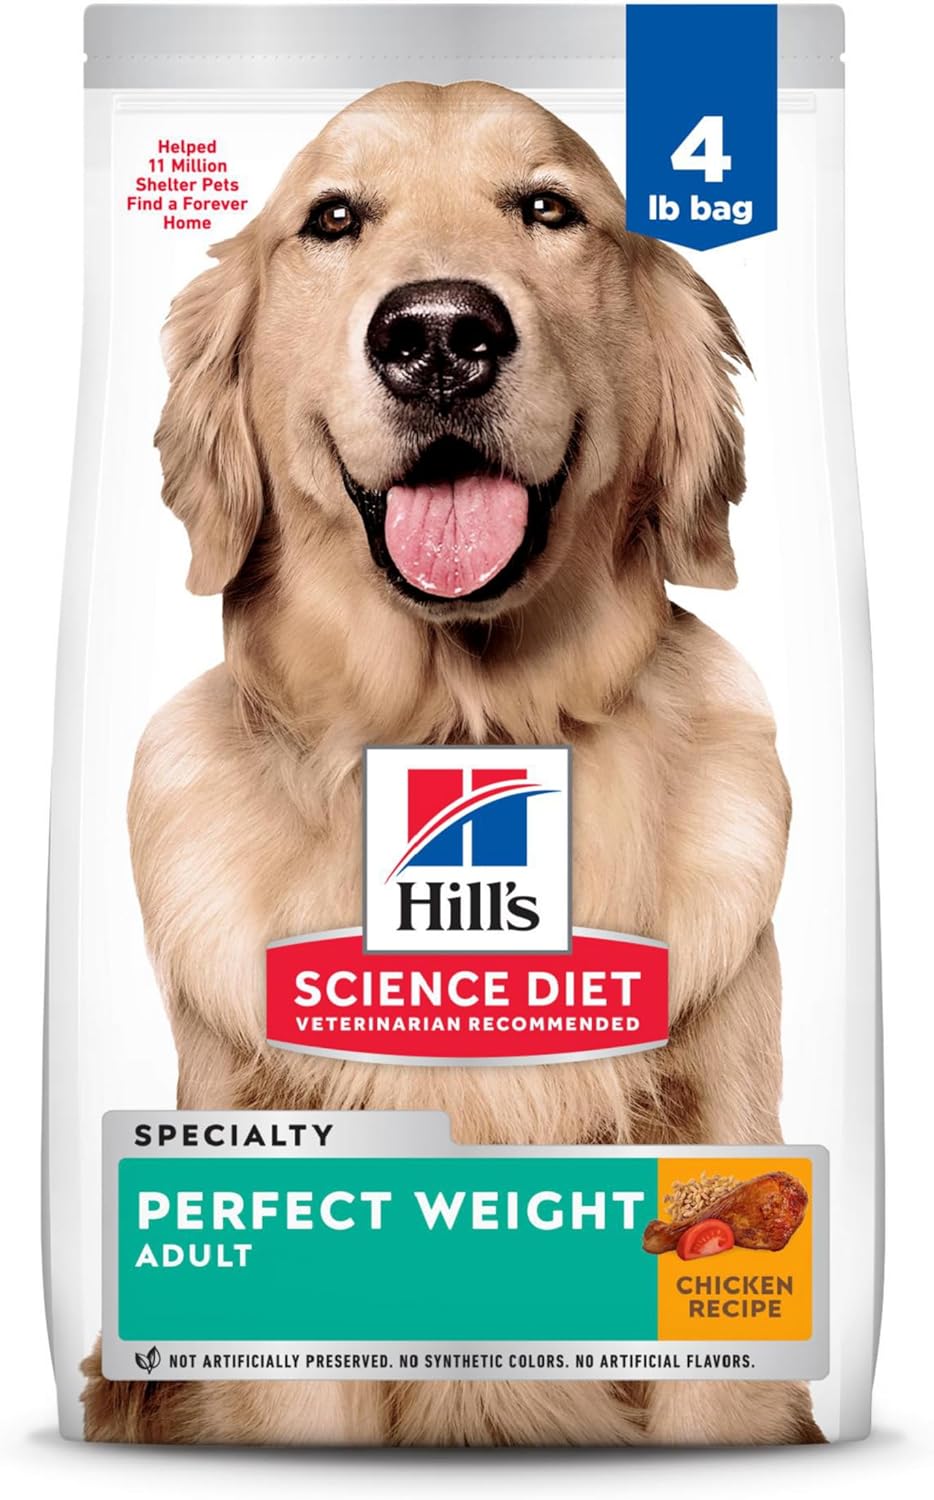 Hill's Pet Nutrition Hill's Pet Nutrition Science Diet Dry Dog Food, Adult, Perfect Weight for Healthy Weight & Weight Management, Chicken Recipe, 4 lb Bag